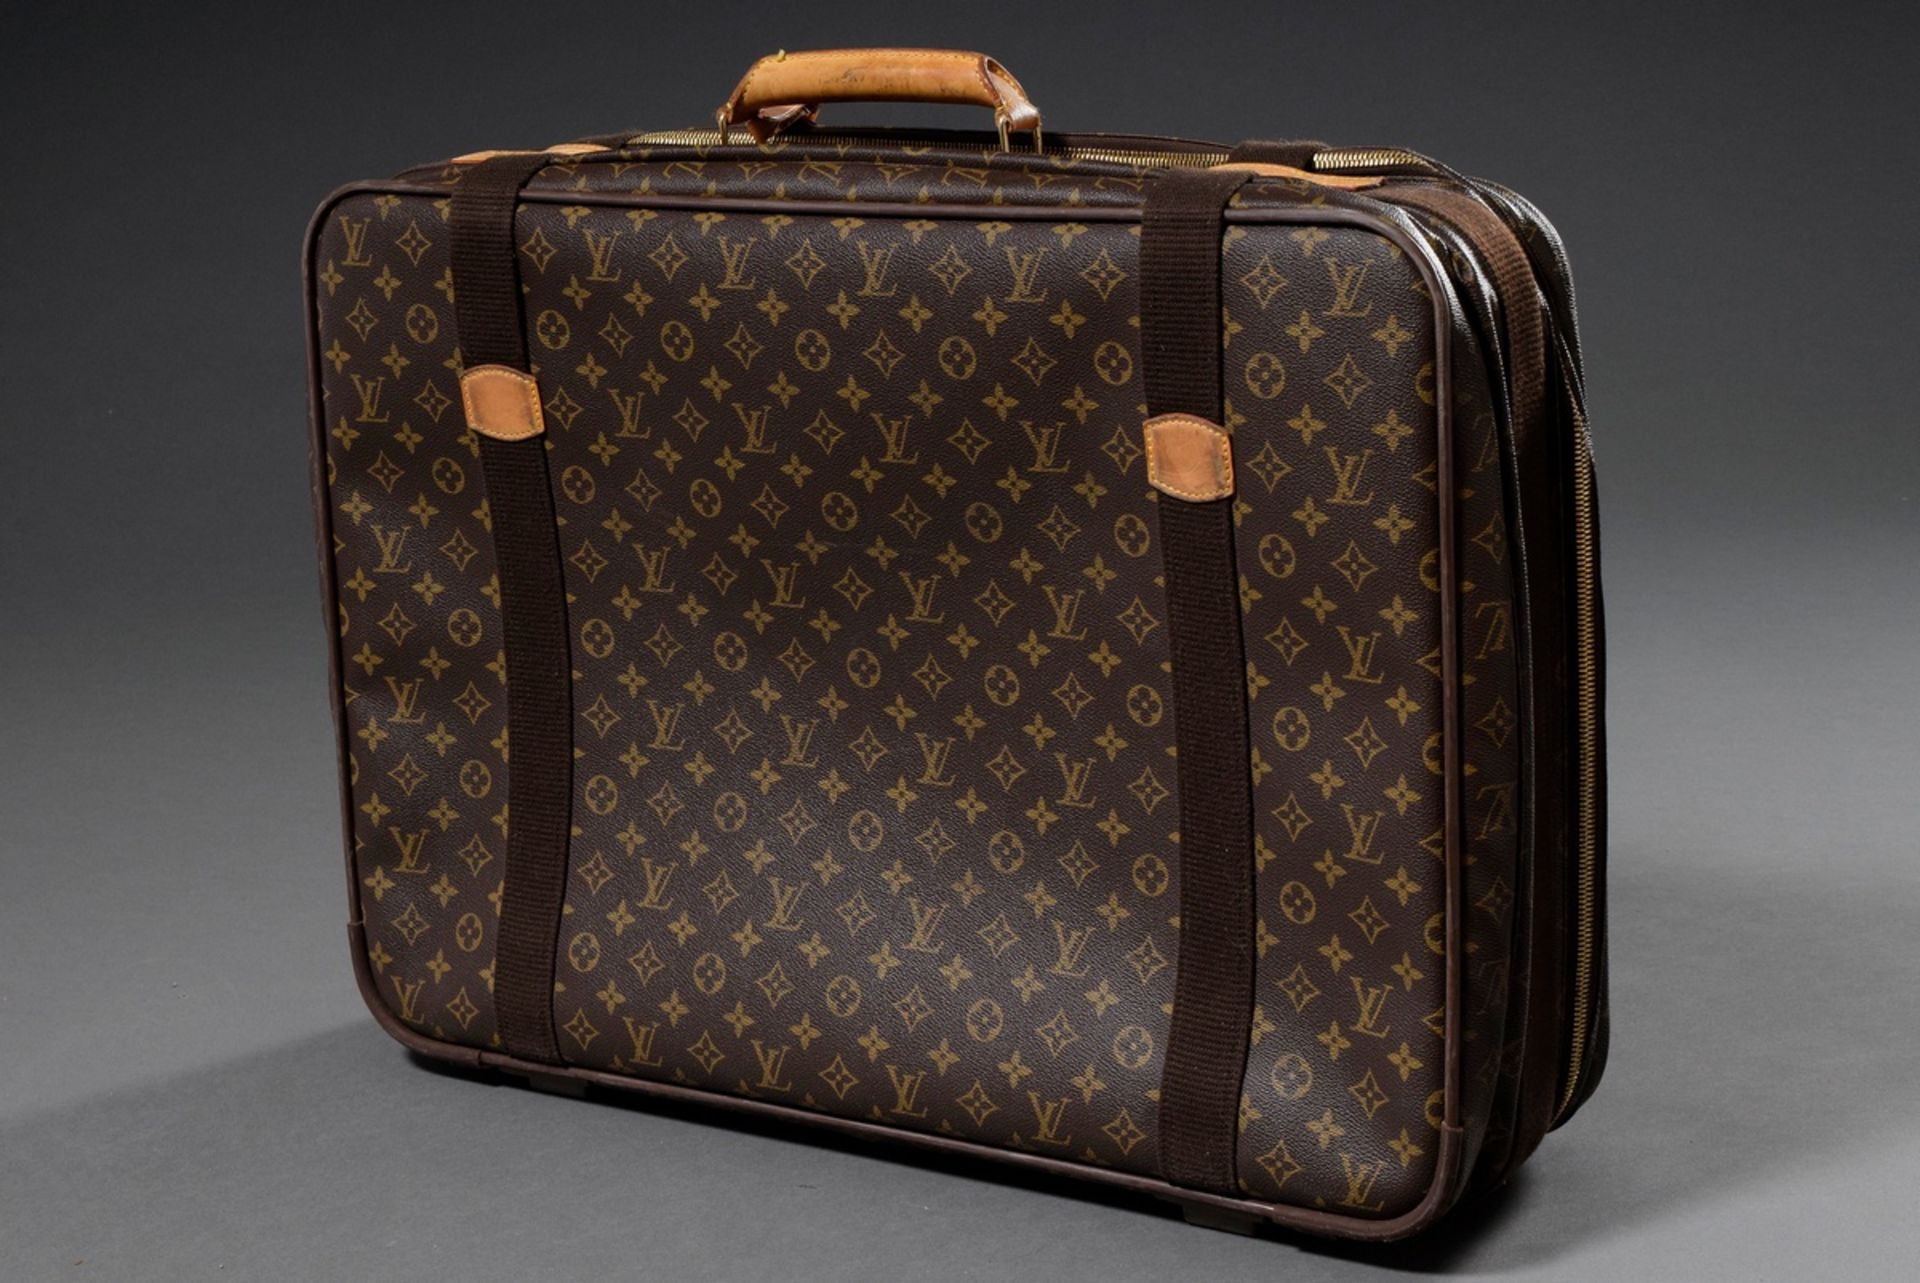 Louis Vuitton suitcase "Satellite 70" in monogrammed canvas with light cowhide details, gold-colour - Image 2 of 6